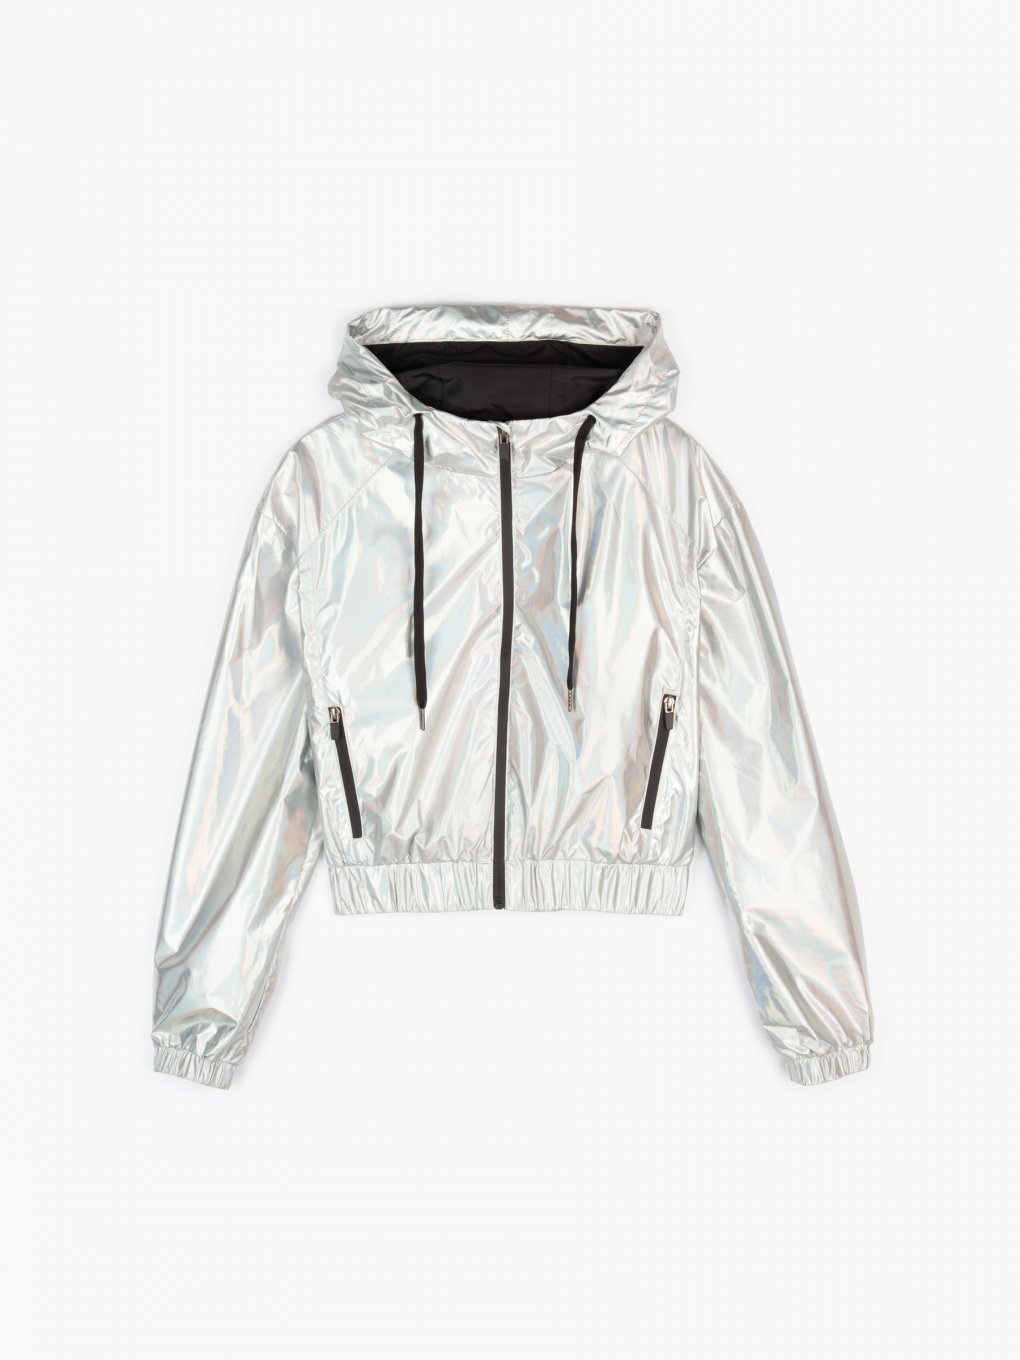 Water-resistant holographic sports light jacket with hood